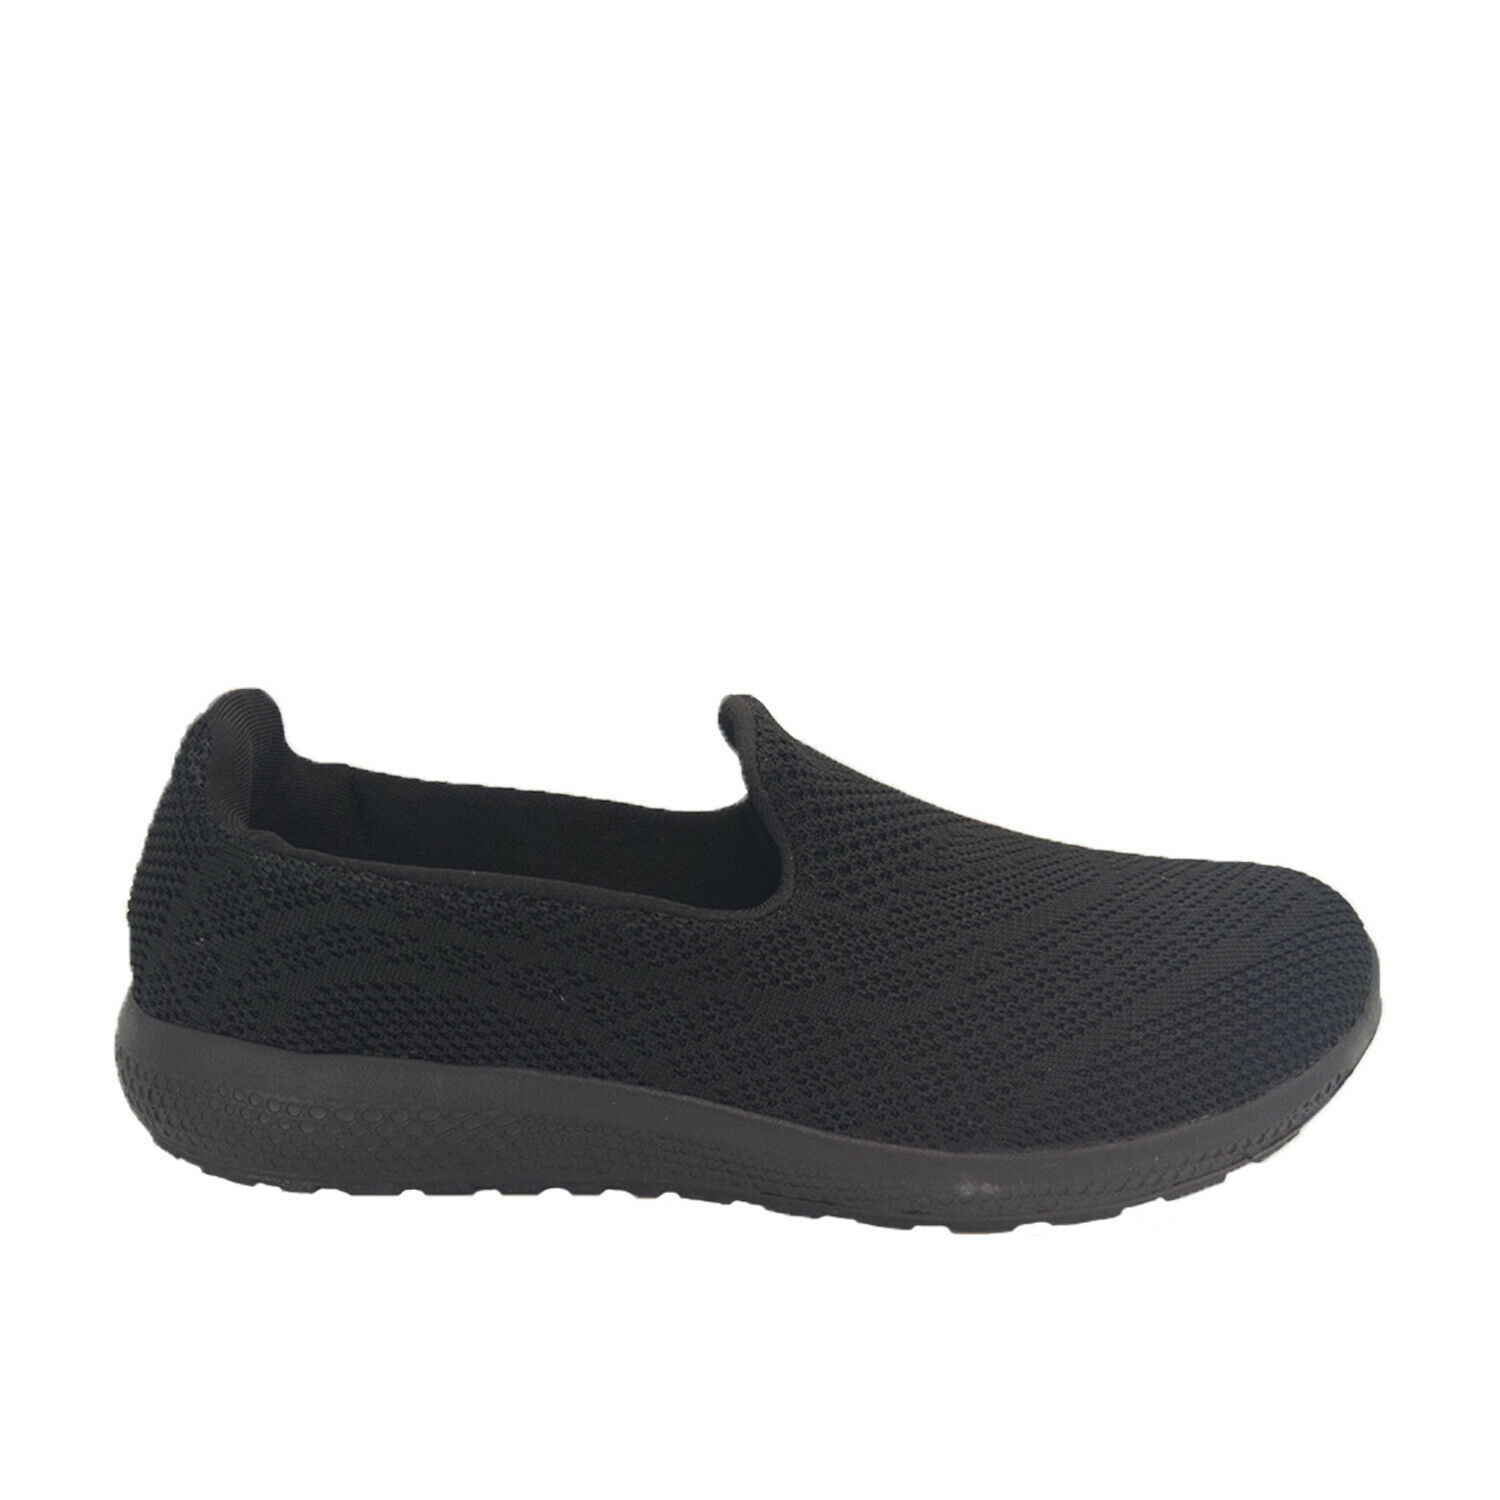 ladies shoes with memory foam insoles